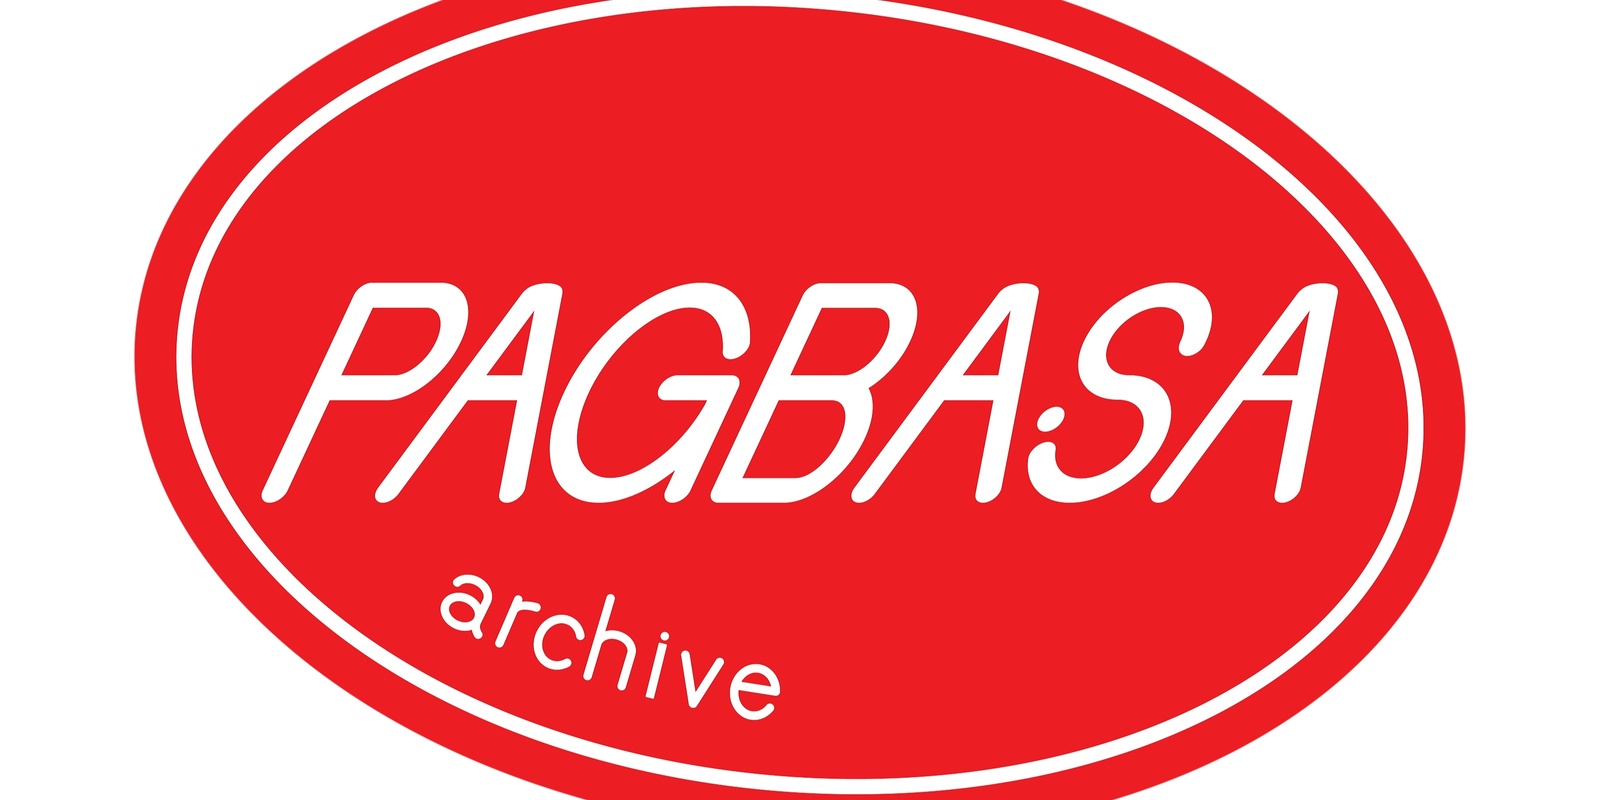 Pagbasa Archive: Launch event